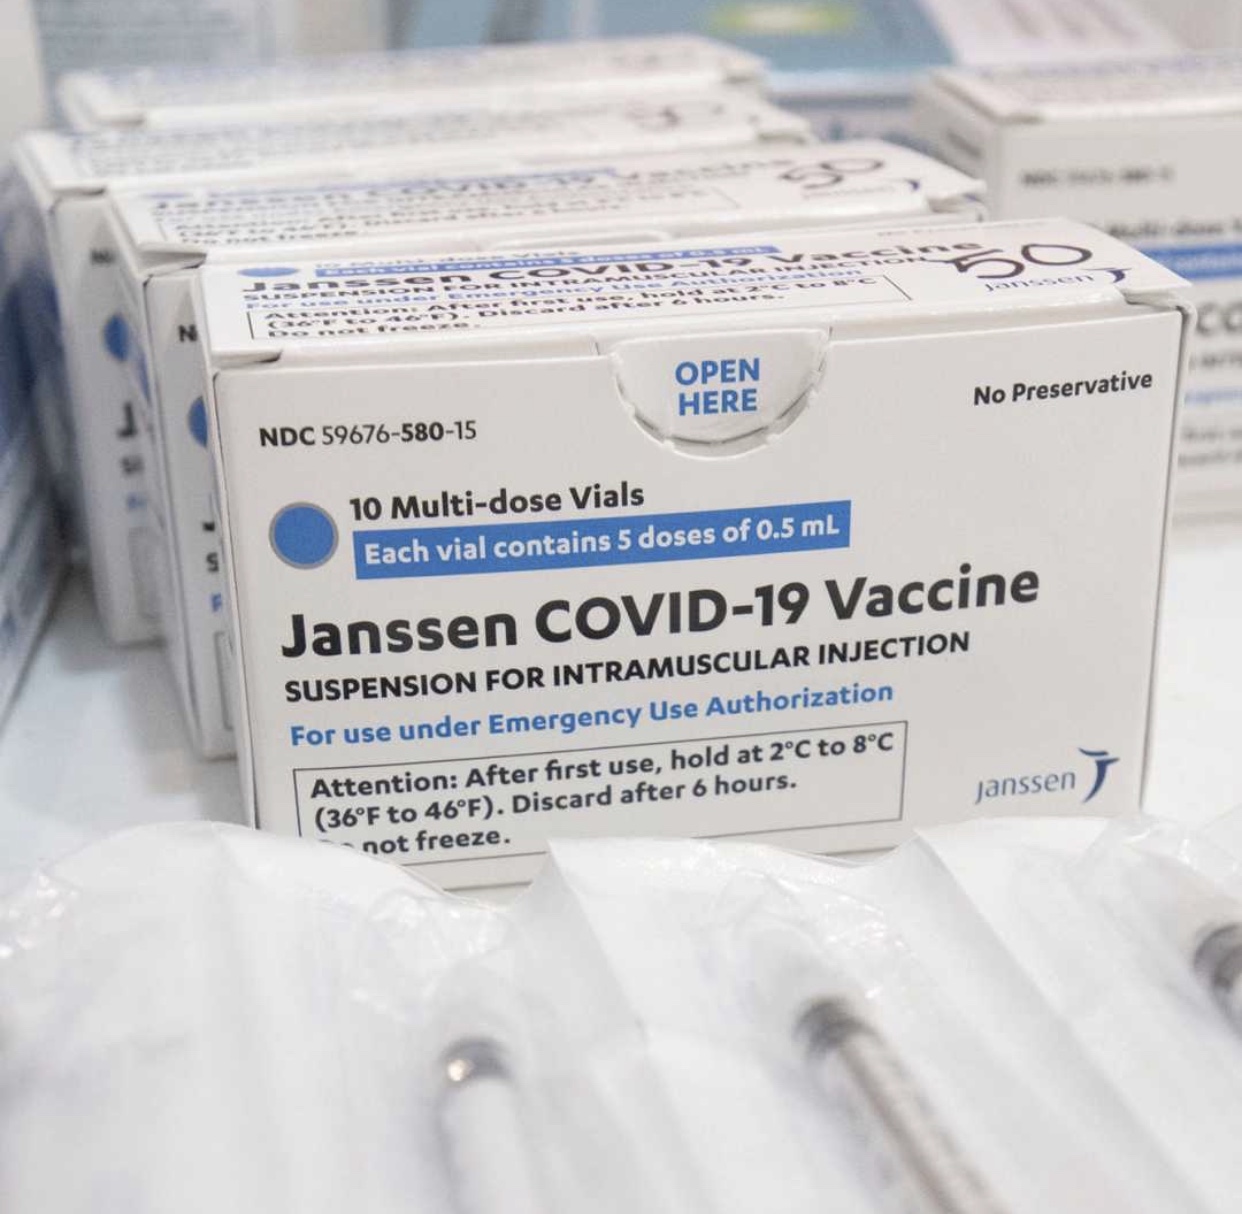 CDC Officials Speculate on Johnson & Johnson COVID Vaccine Complications